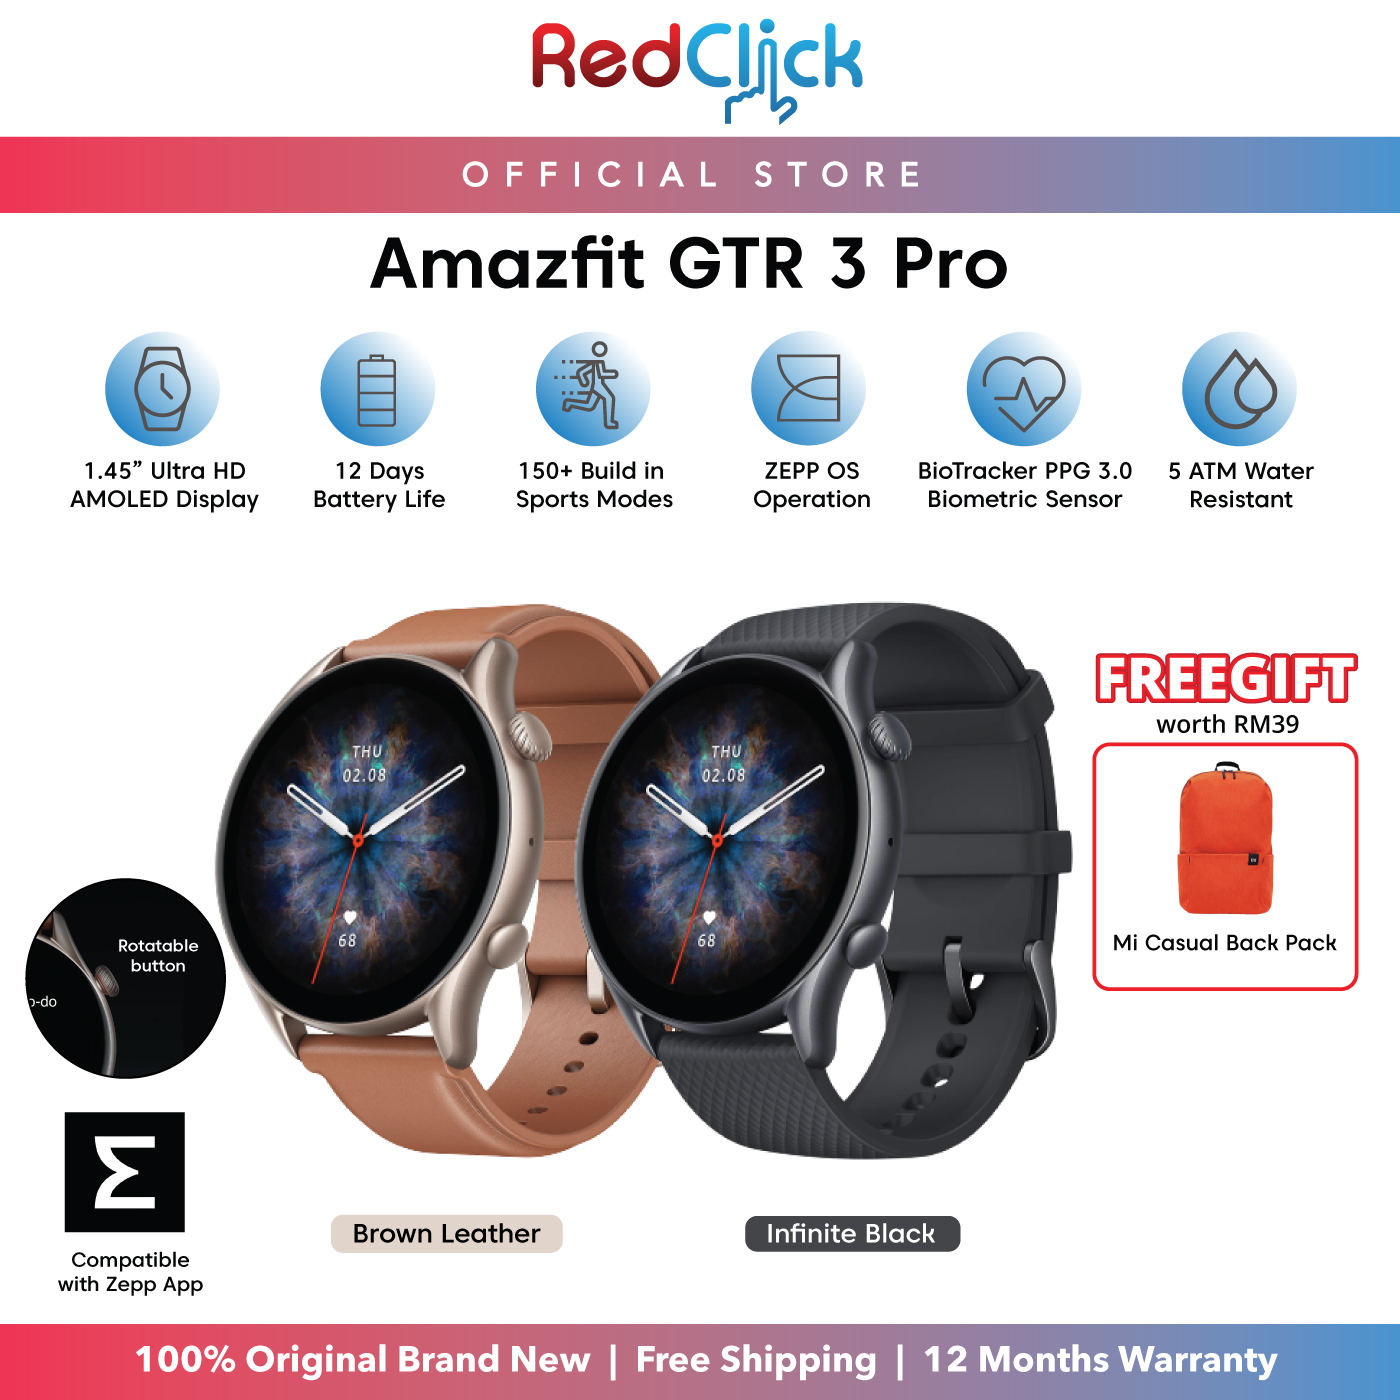 Amazfit GTR 3 Pro 1.45" HD AMOLED Display Classic Premium Design Powerful Zepp OS App Support 12 Days Long Battery Life + Free Gift Worth RM39